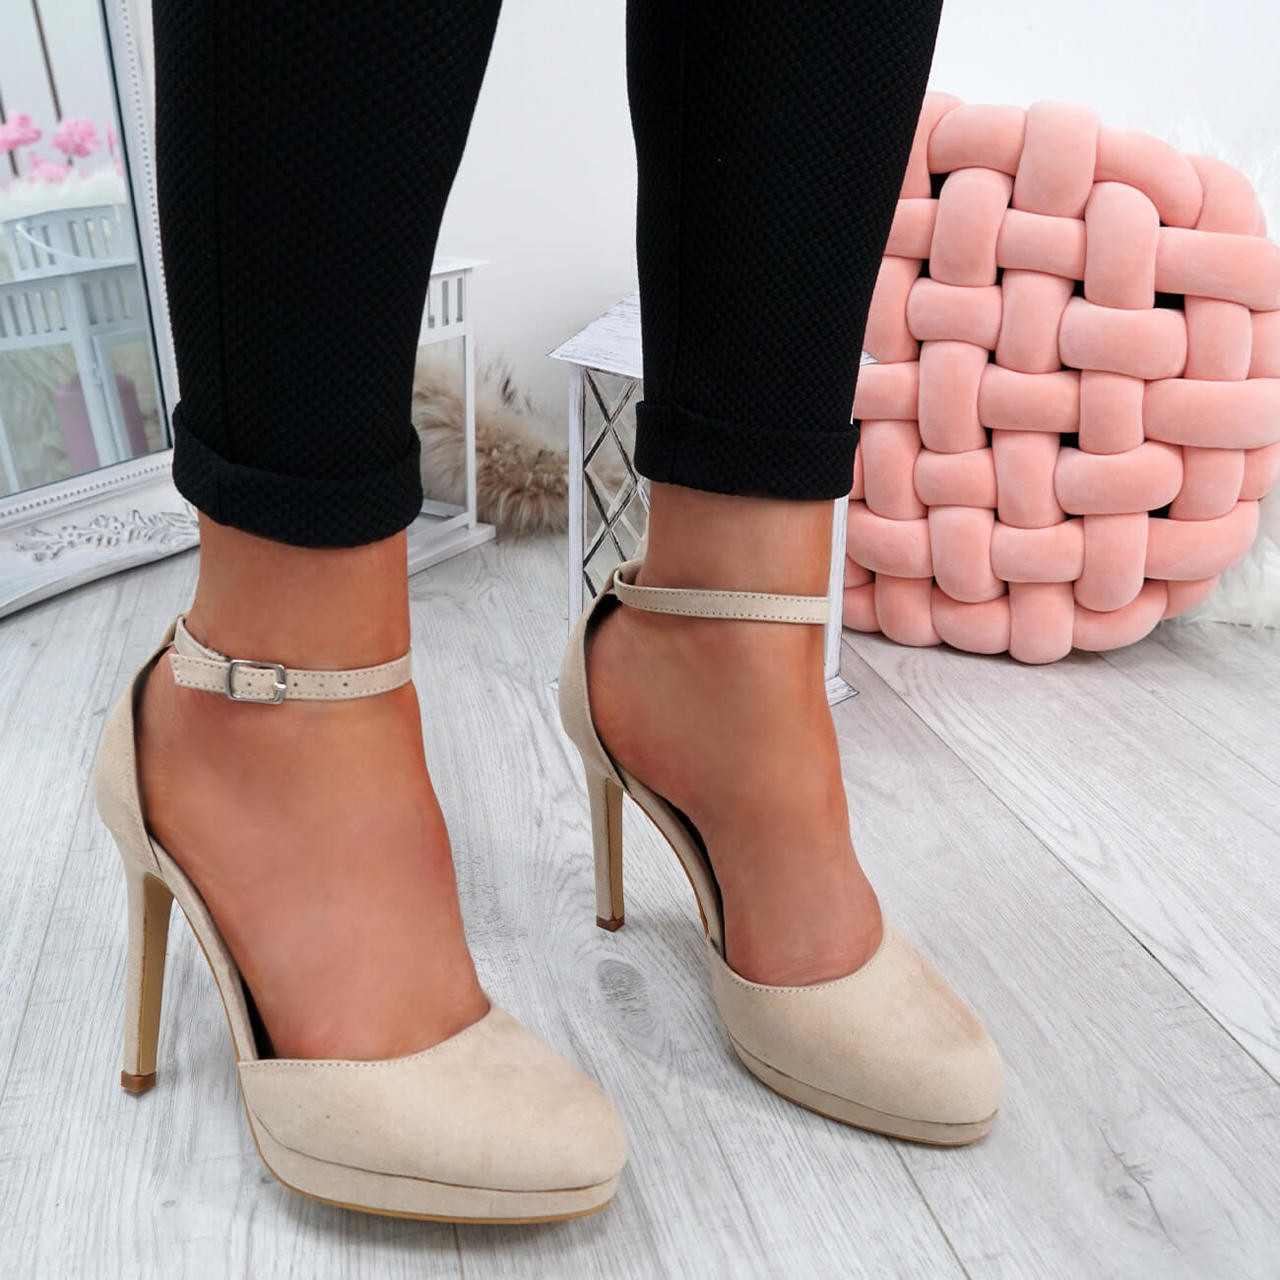 nude closed toed shoes